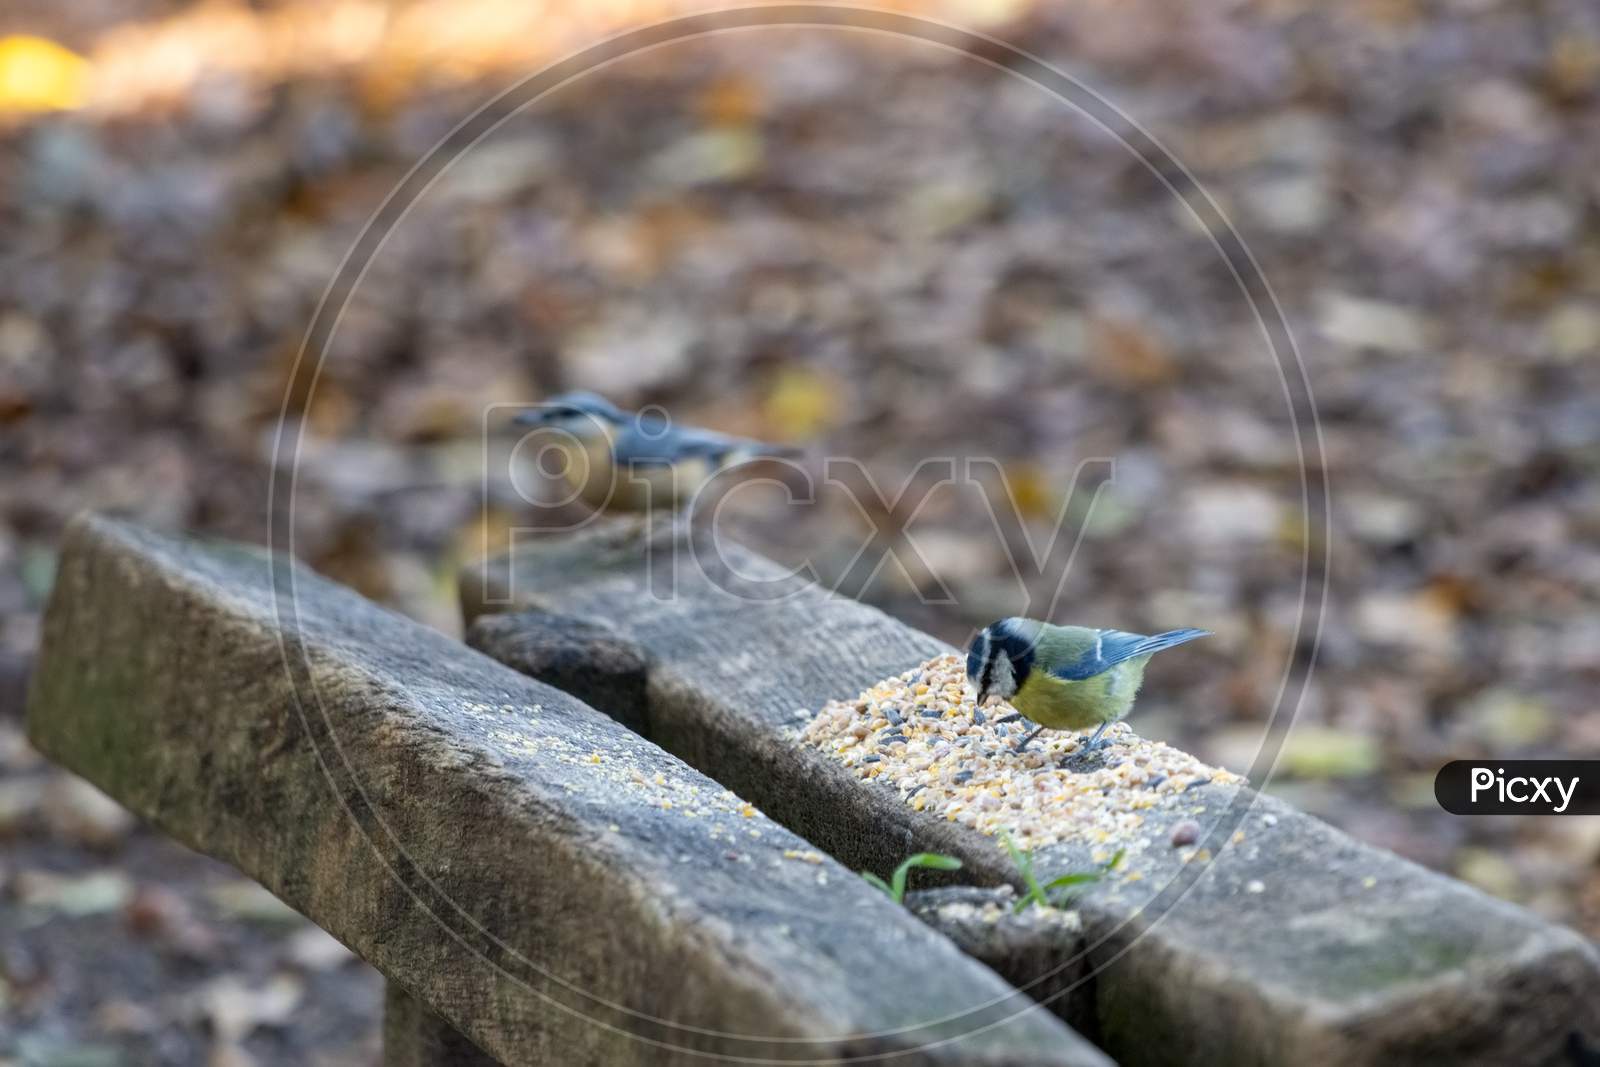 Blue Tit Feeding On Seed Spread Over A Wooden Seat